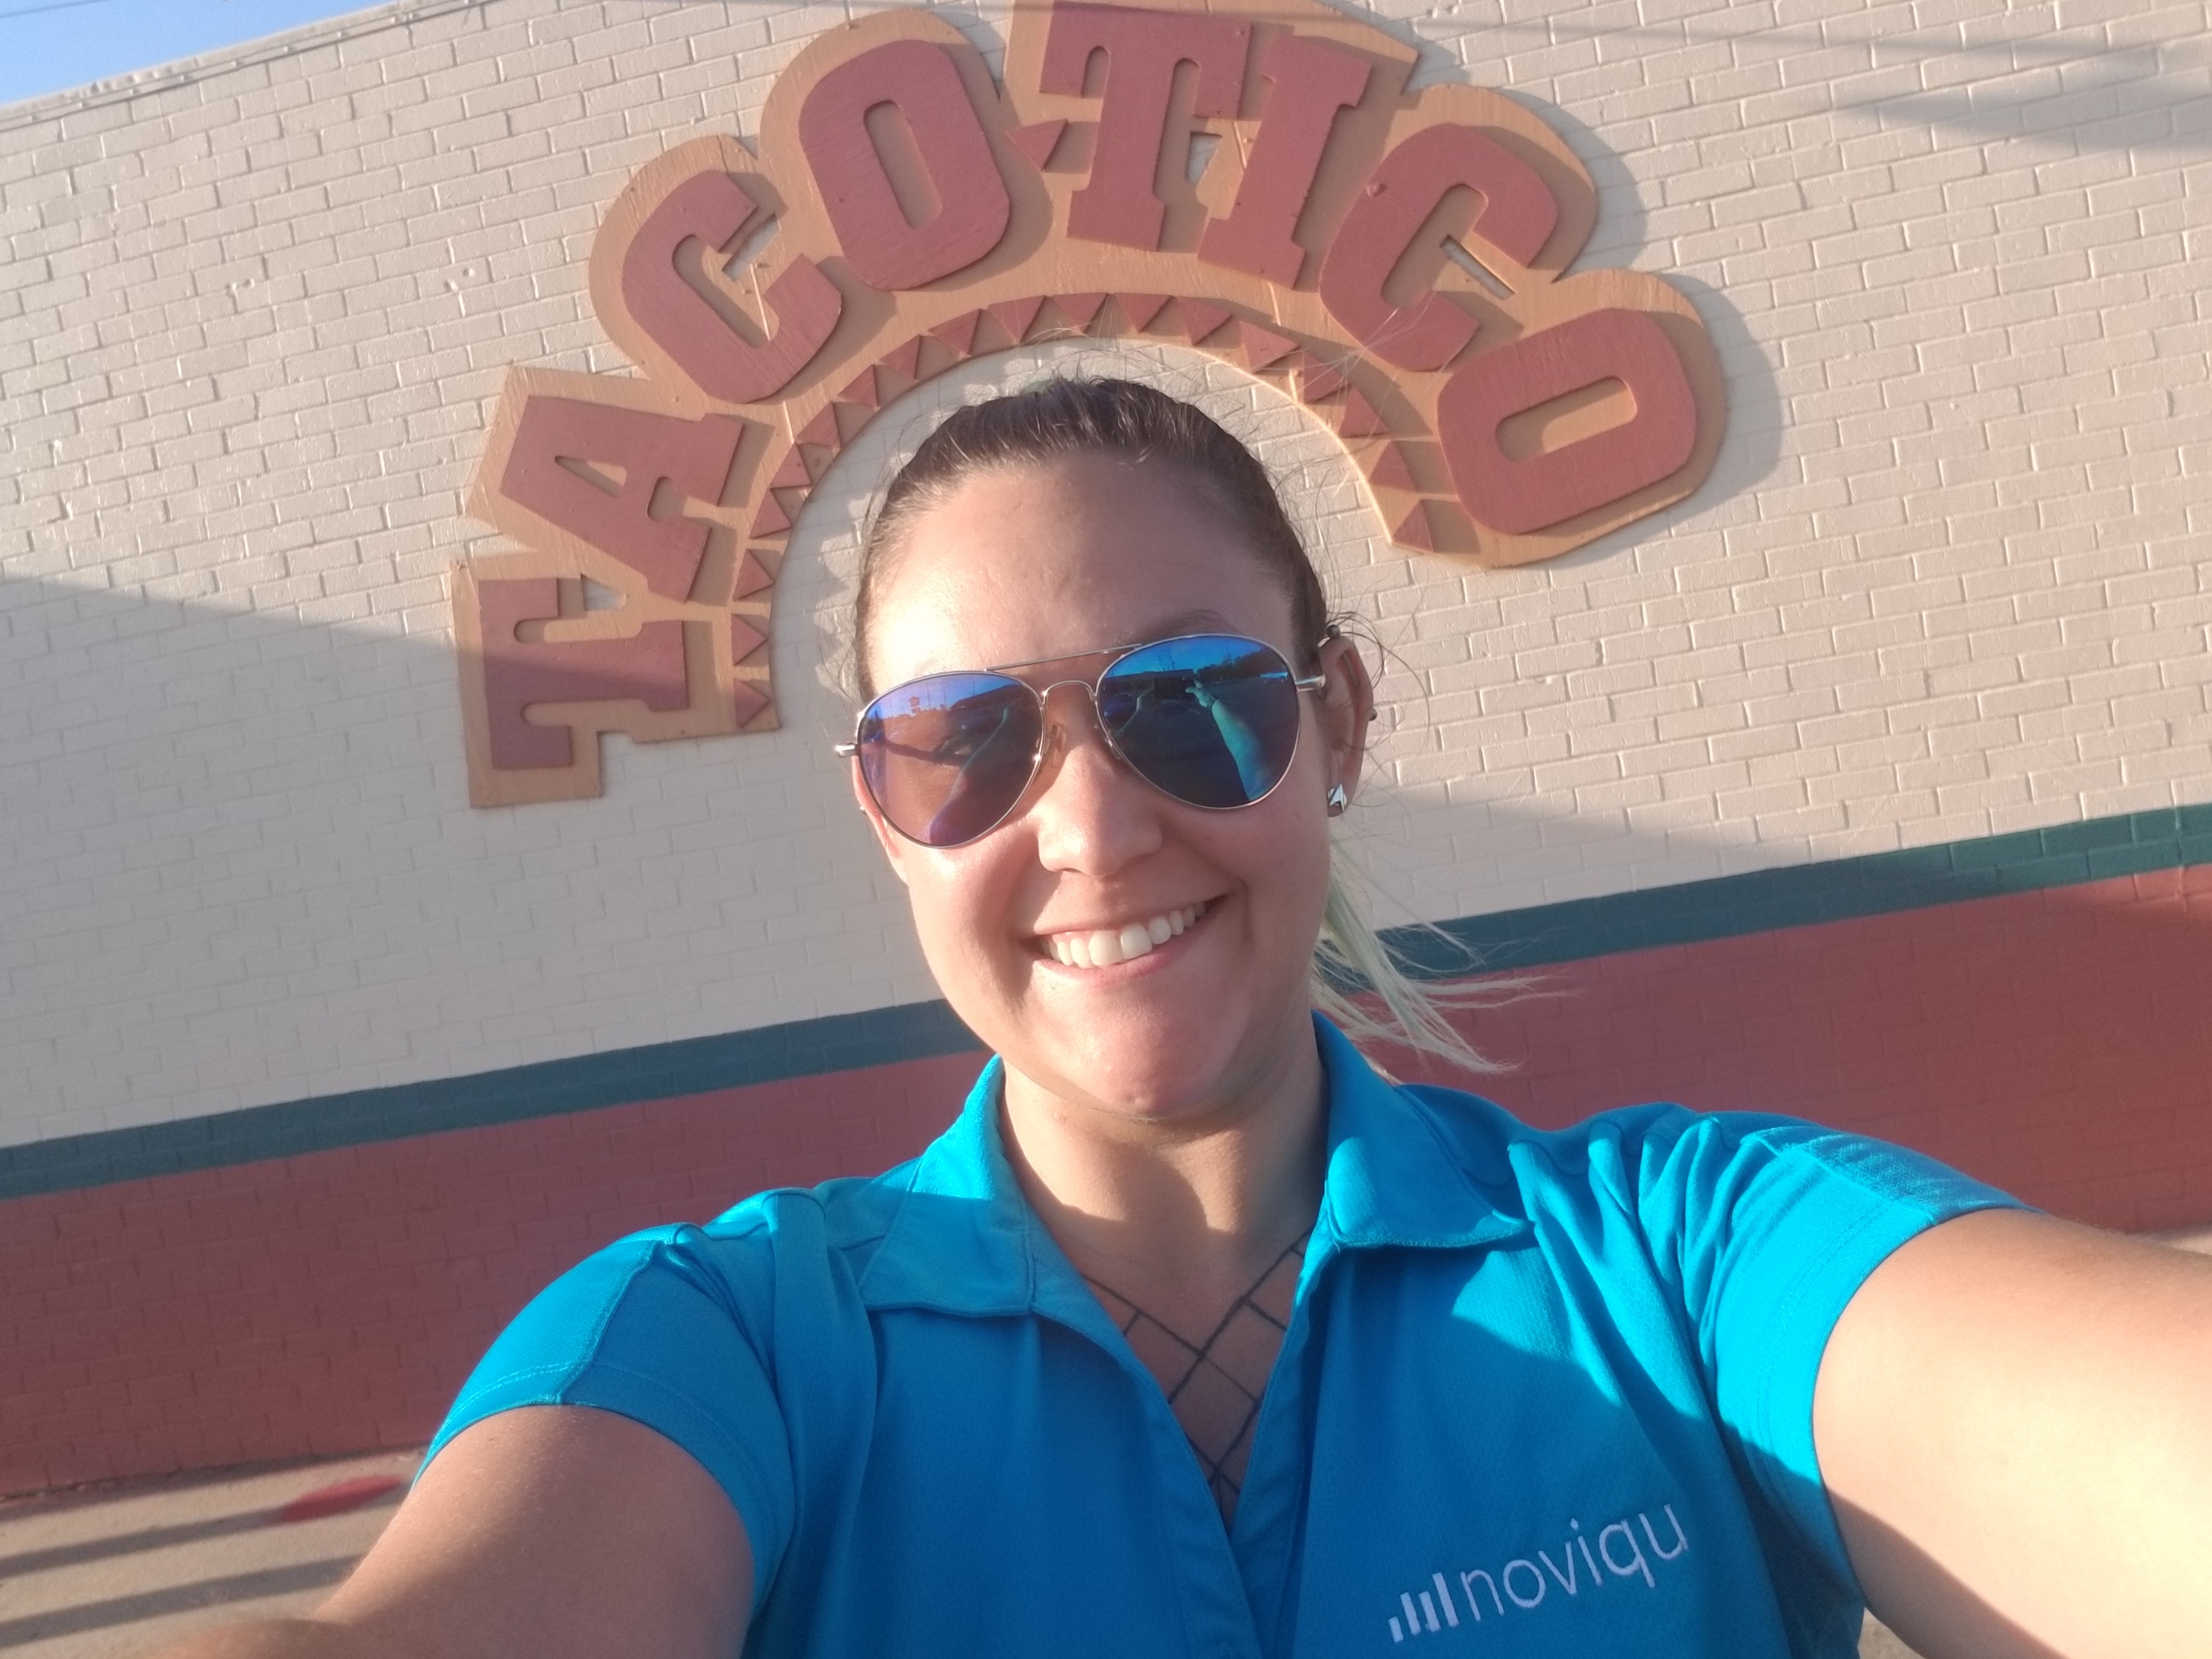 Noviqu Launches Product for Franchising Industry with Taco Tico